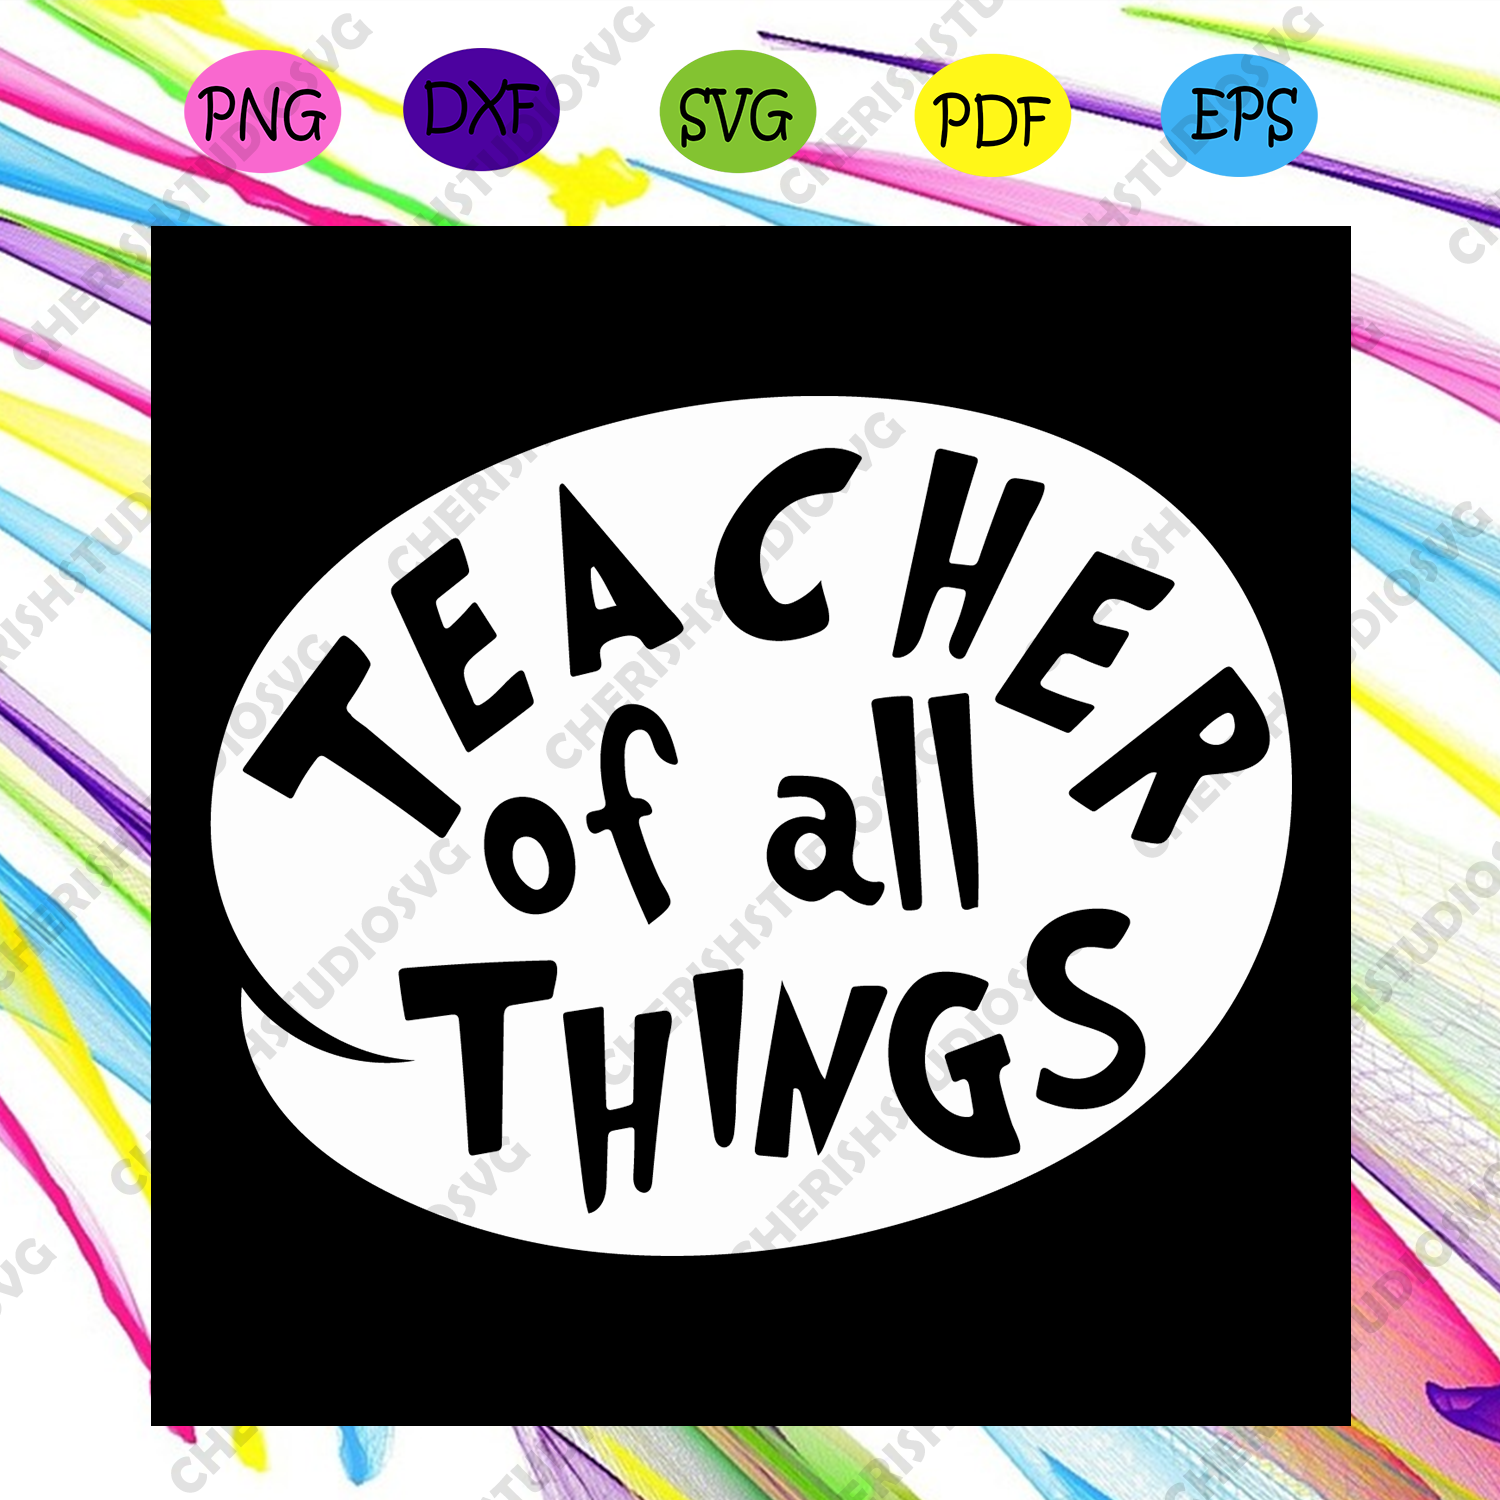 Download Teacher Of All Things Svg Dr Seuss Svg Catinthehat Svg Thelorax Svg Cherishsvgstudio